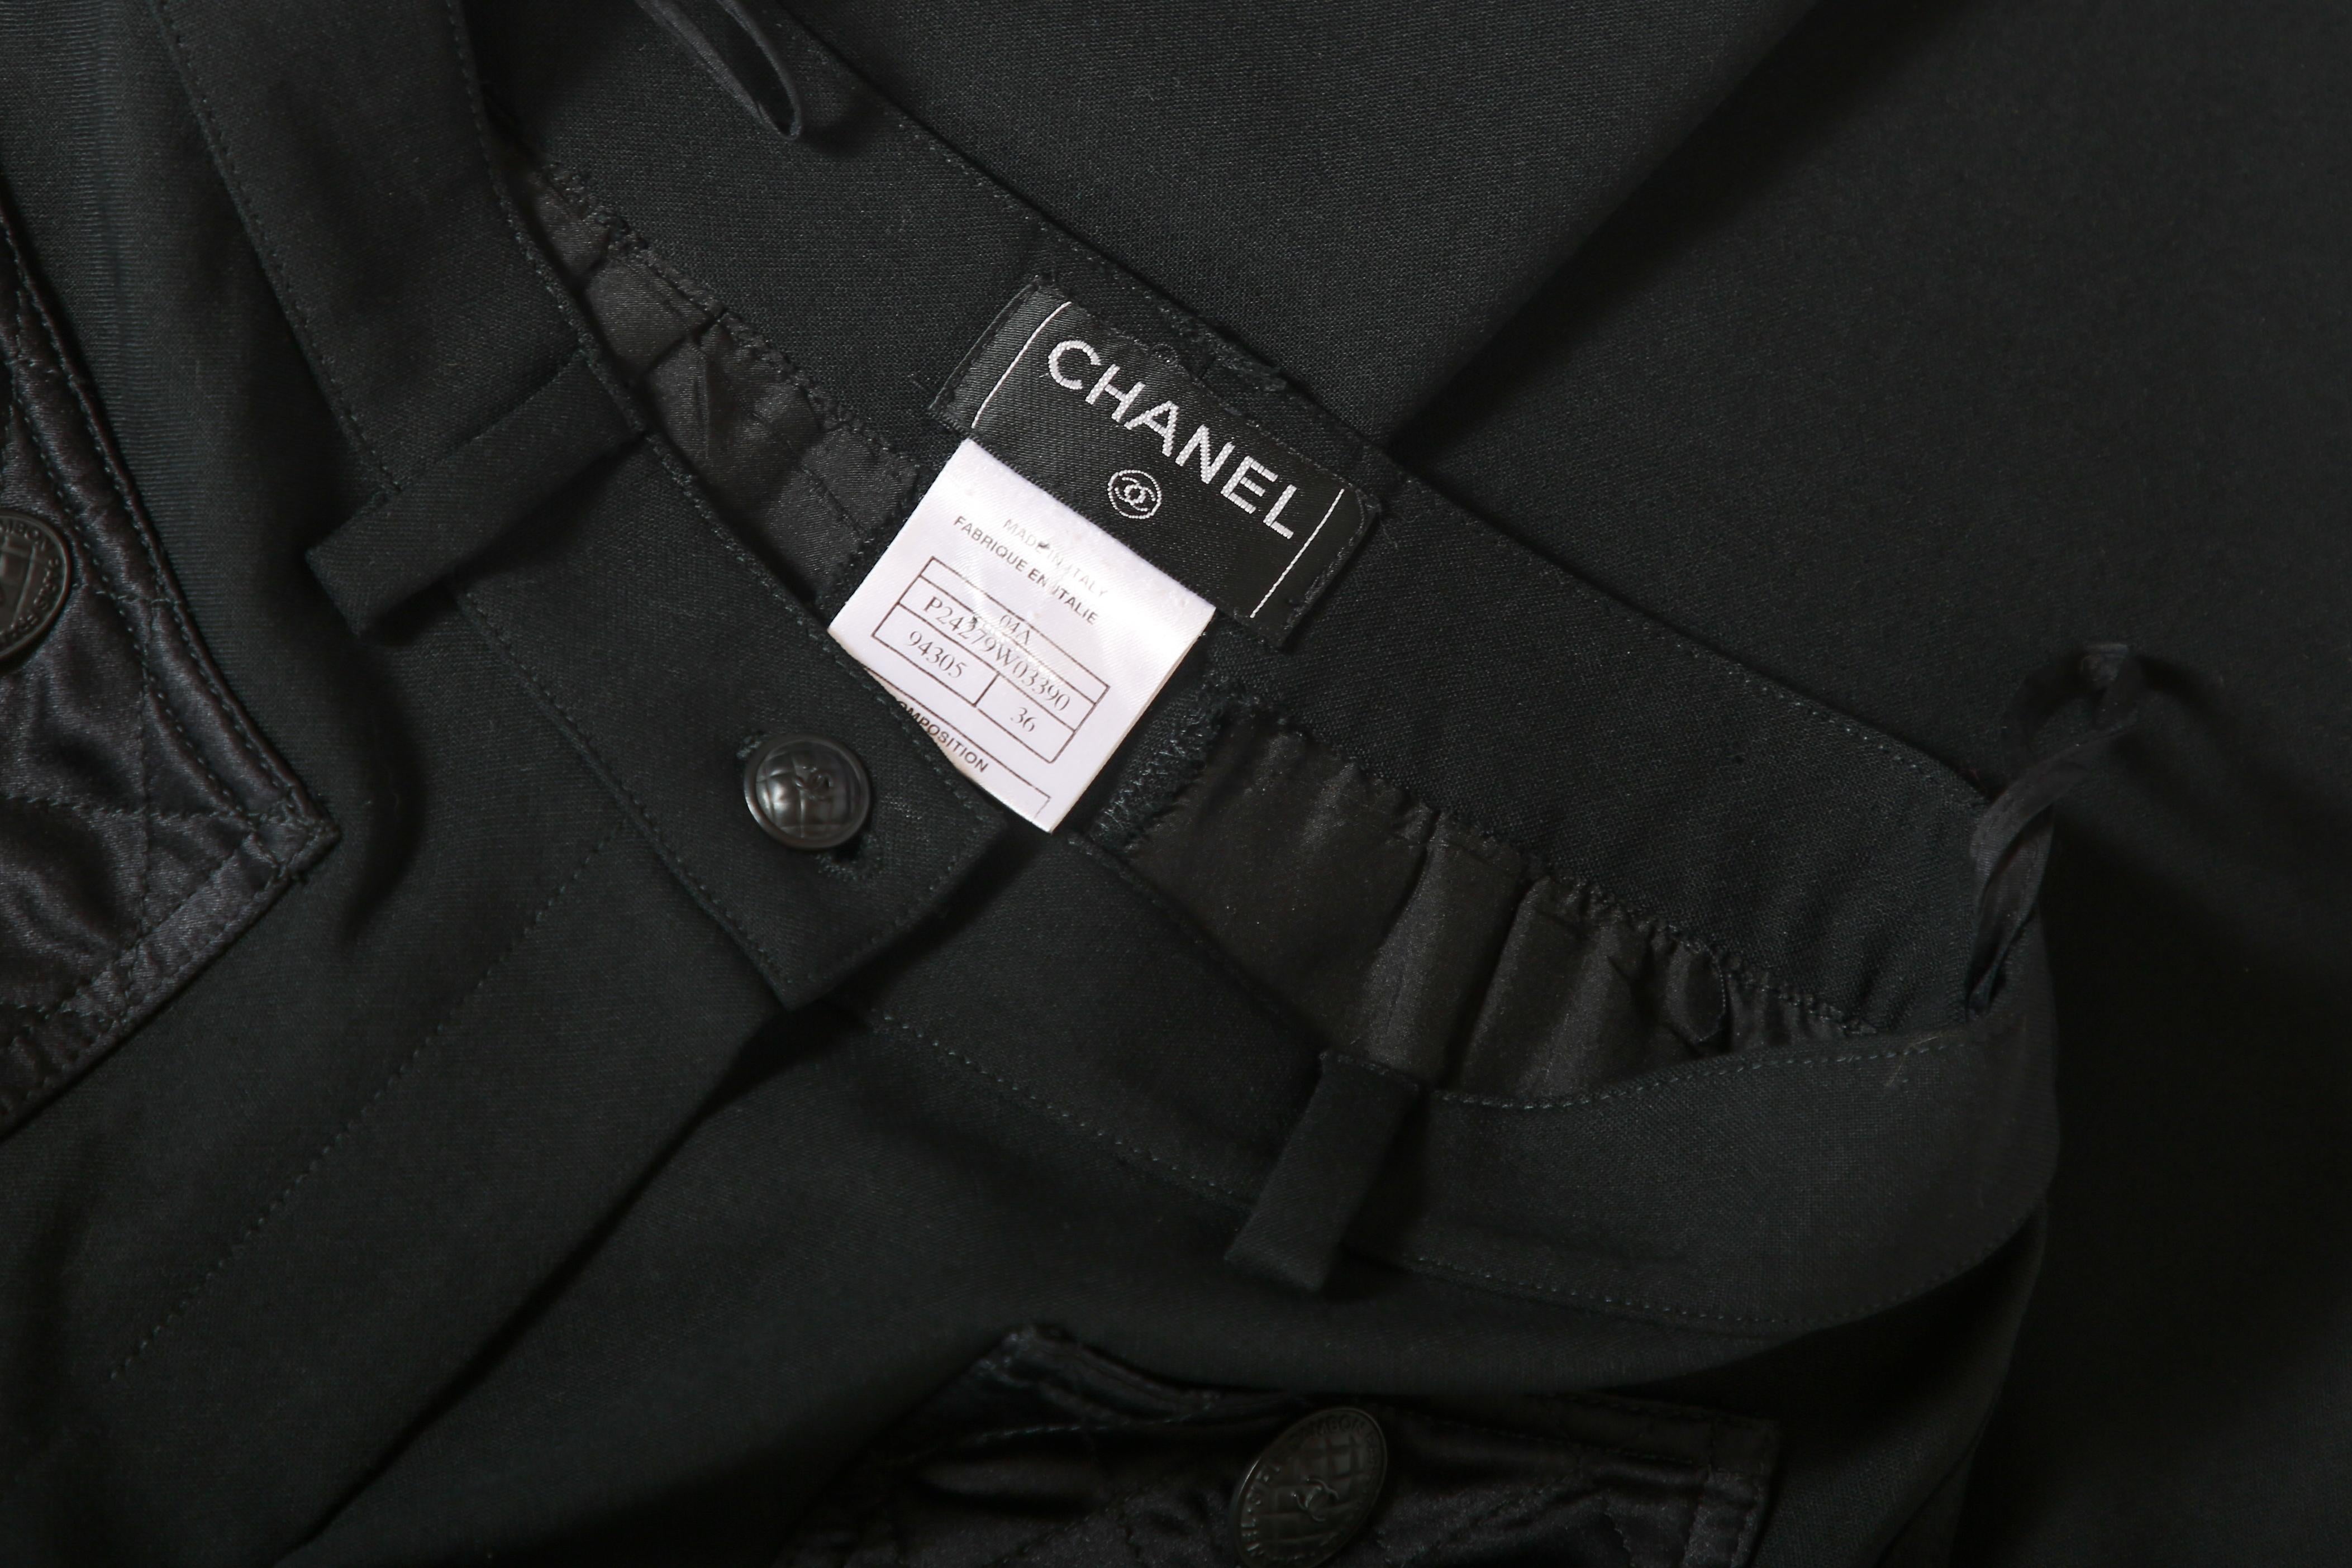 2004 A/H Chanel Black Wool Stretch Pants w/Quilted Satin Hip Pockets For Sale 2